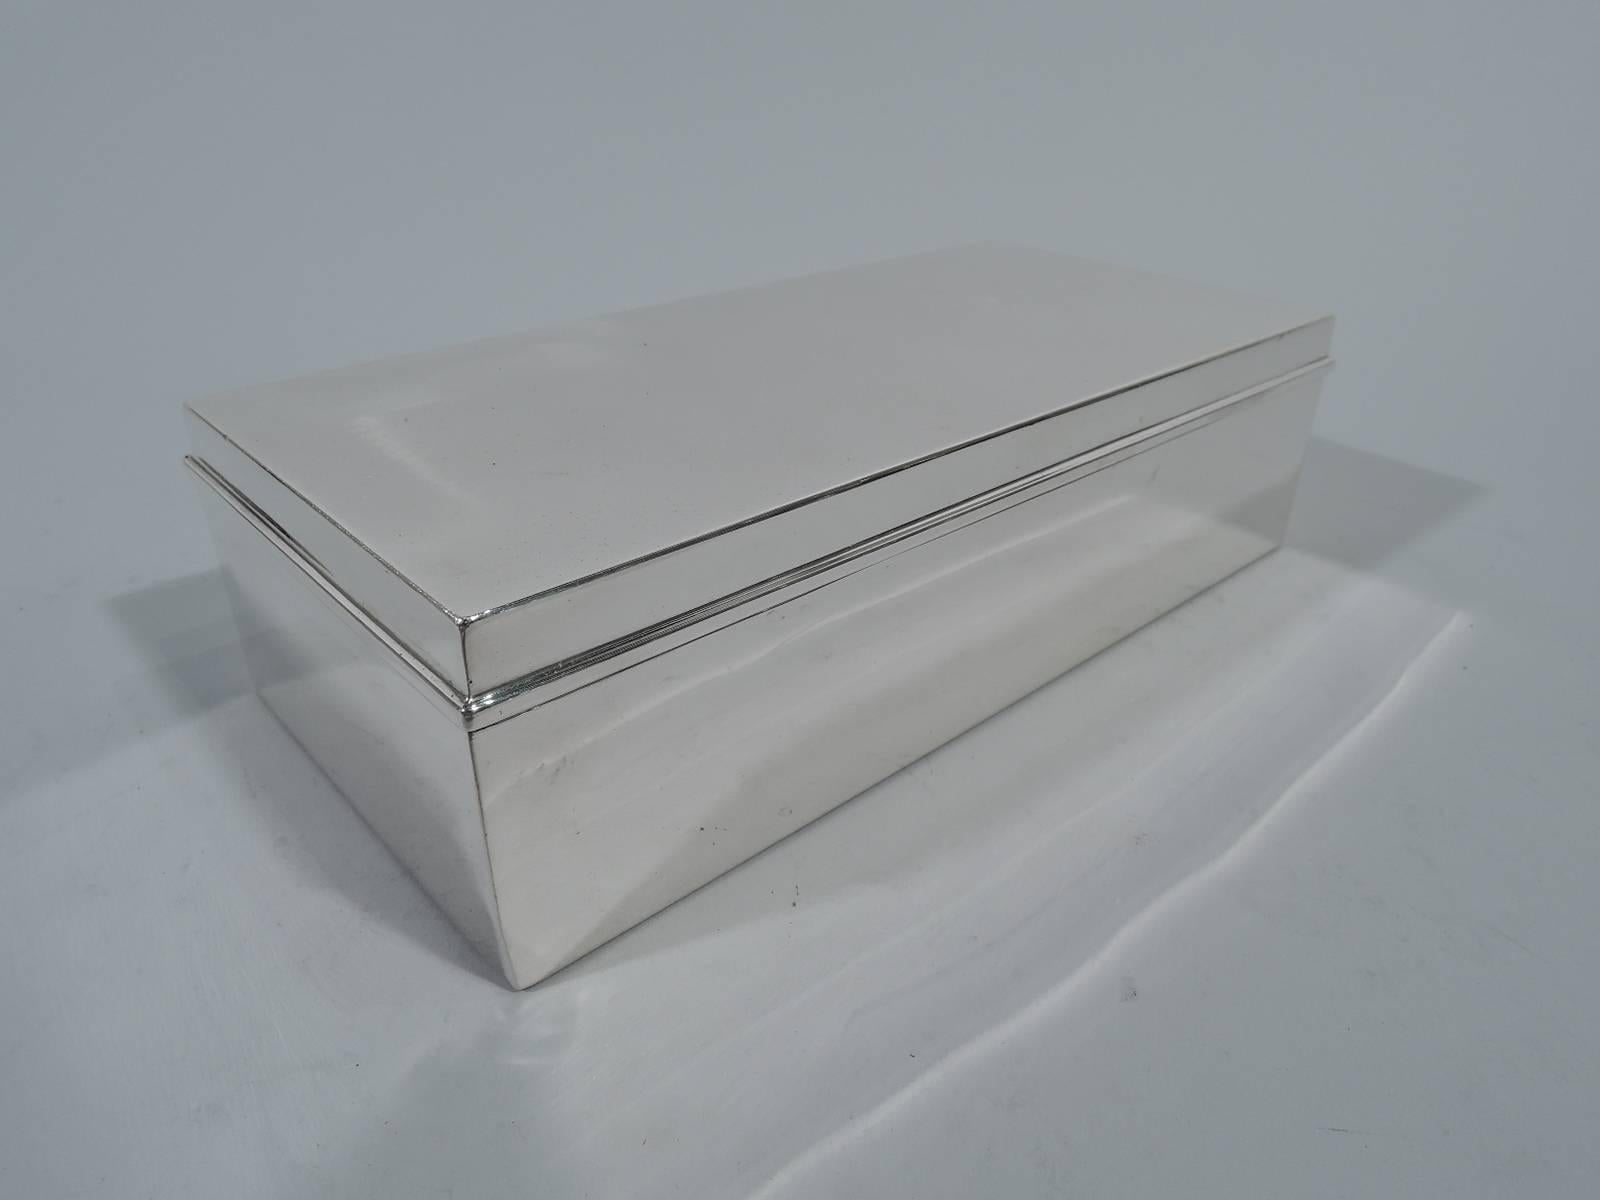 Smart and modern sterling silver desk box. Made by Tiffany & Co. in New York, circa 1936. Rectangular with straight sides and sharp corners. Cover hinged with molded rim. Box interior cedar lined. Hallmark includes pattern no. 22353 (first produced